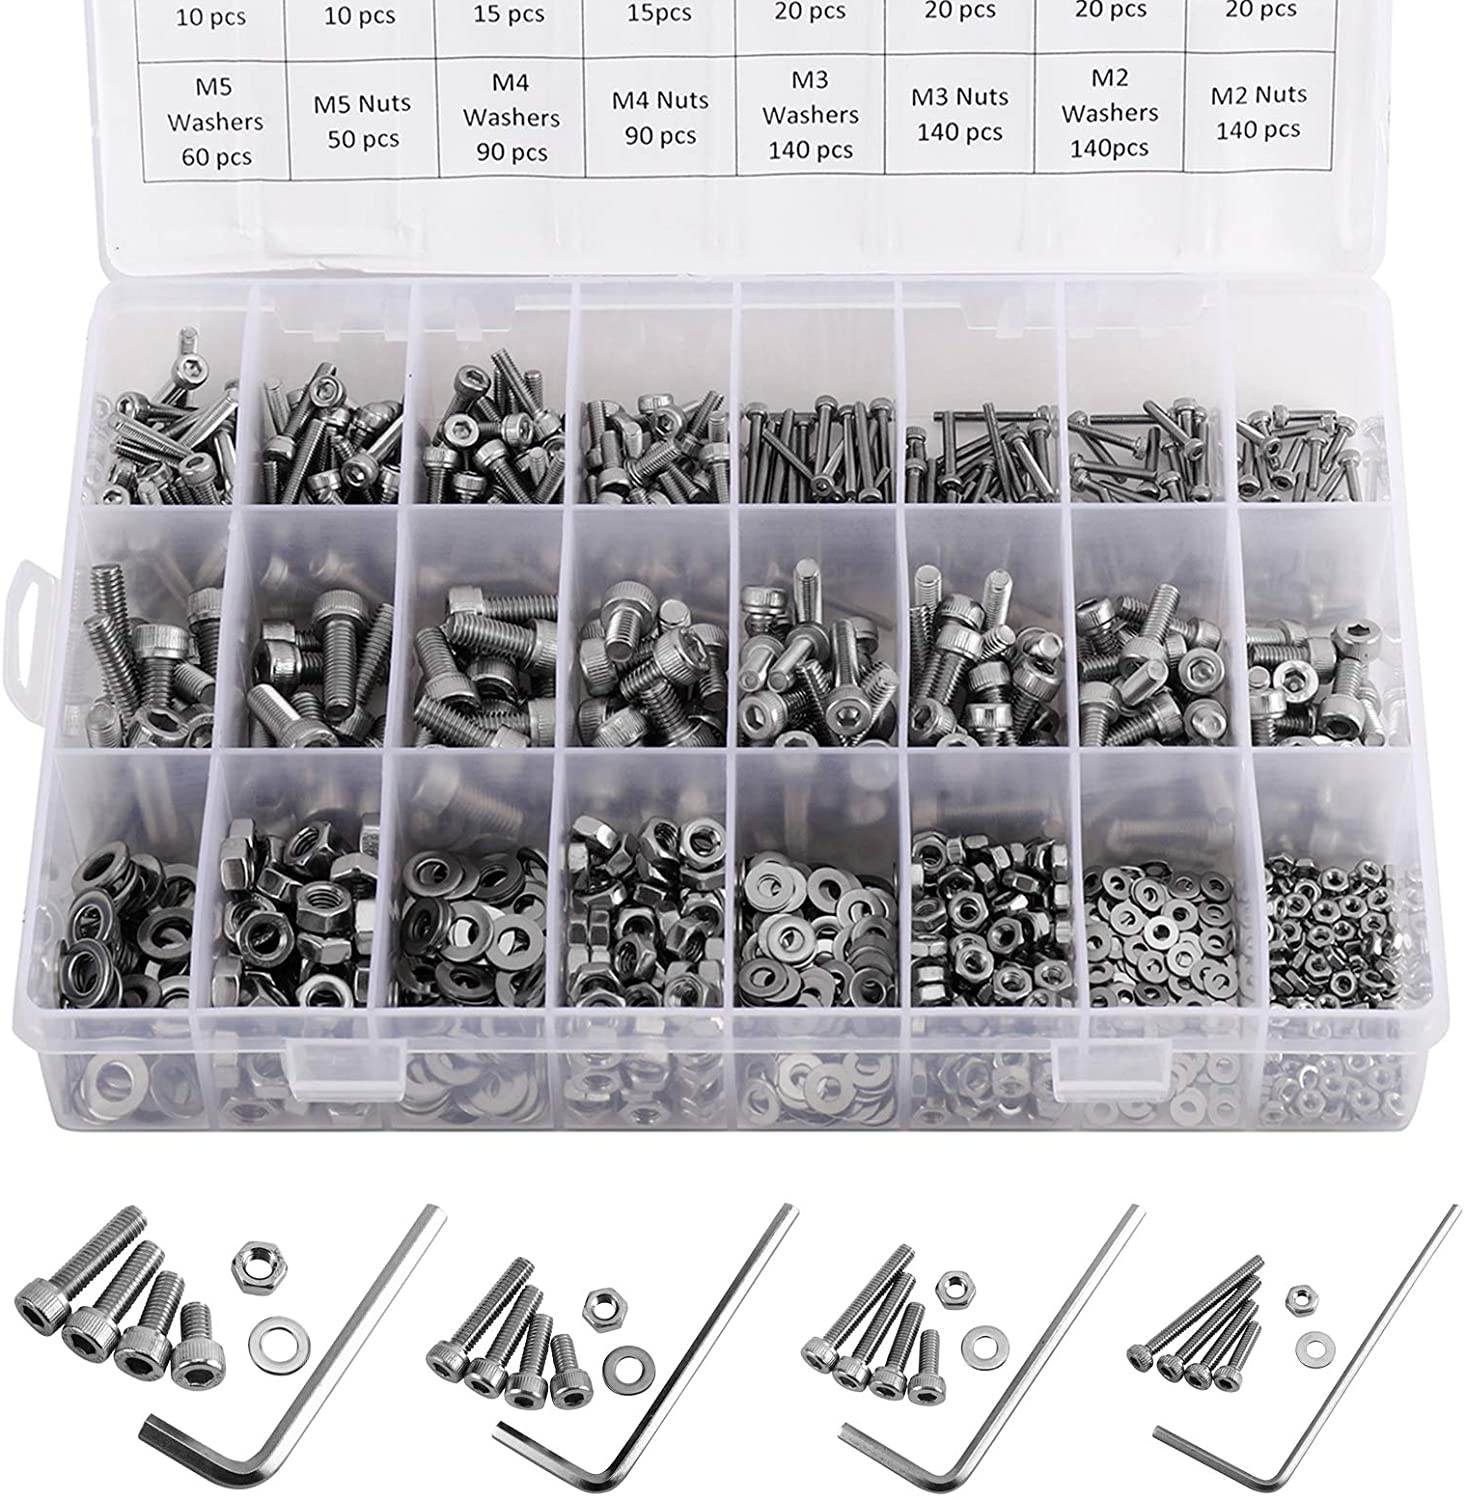 1220 Piece Bolts Nuts And Washer Metric Screw Cap Assortment Kit with Container